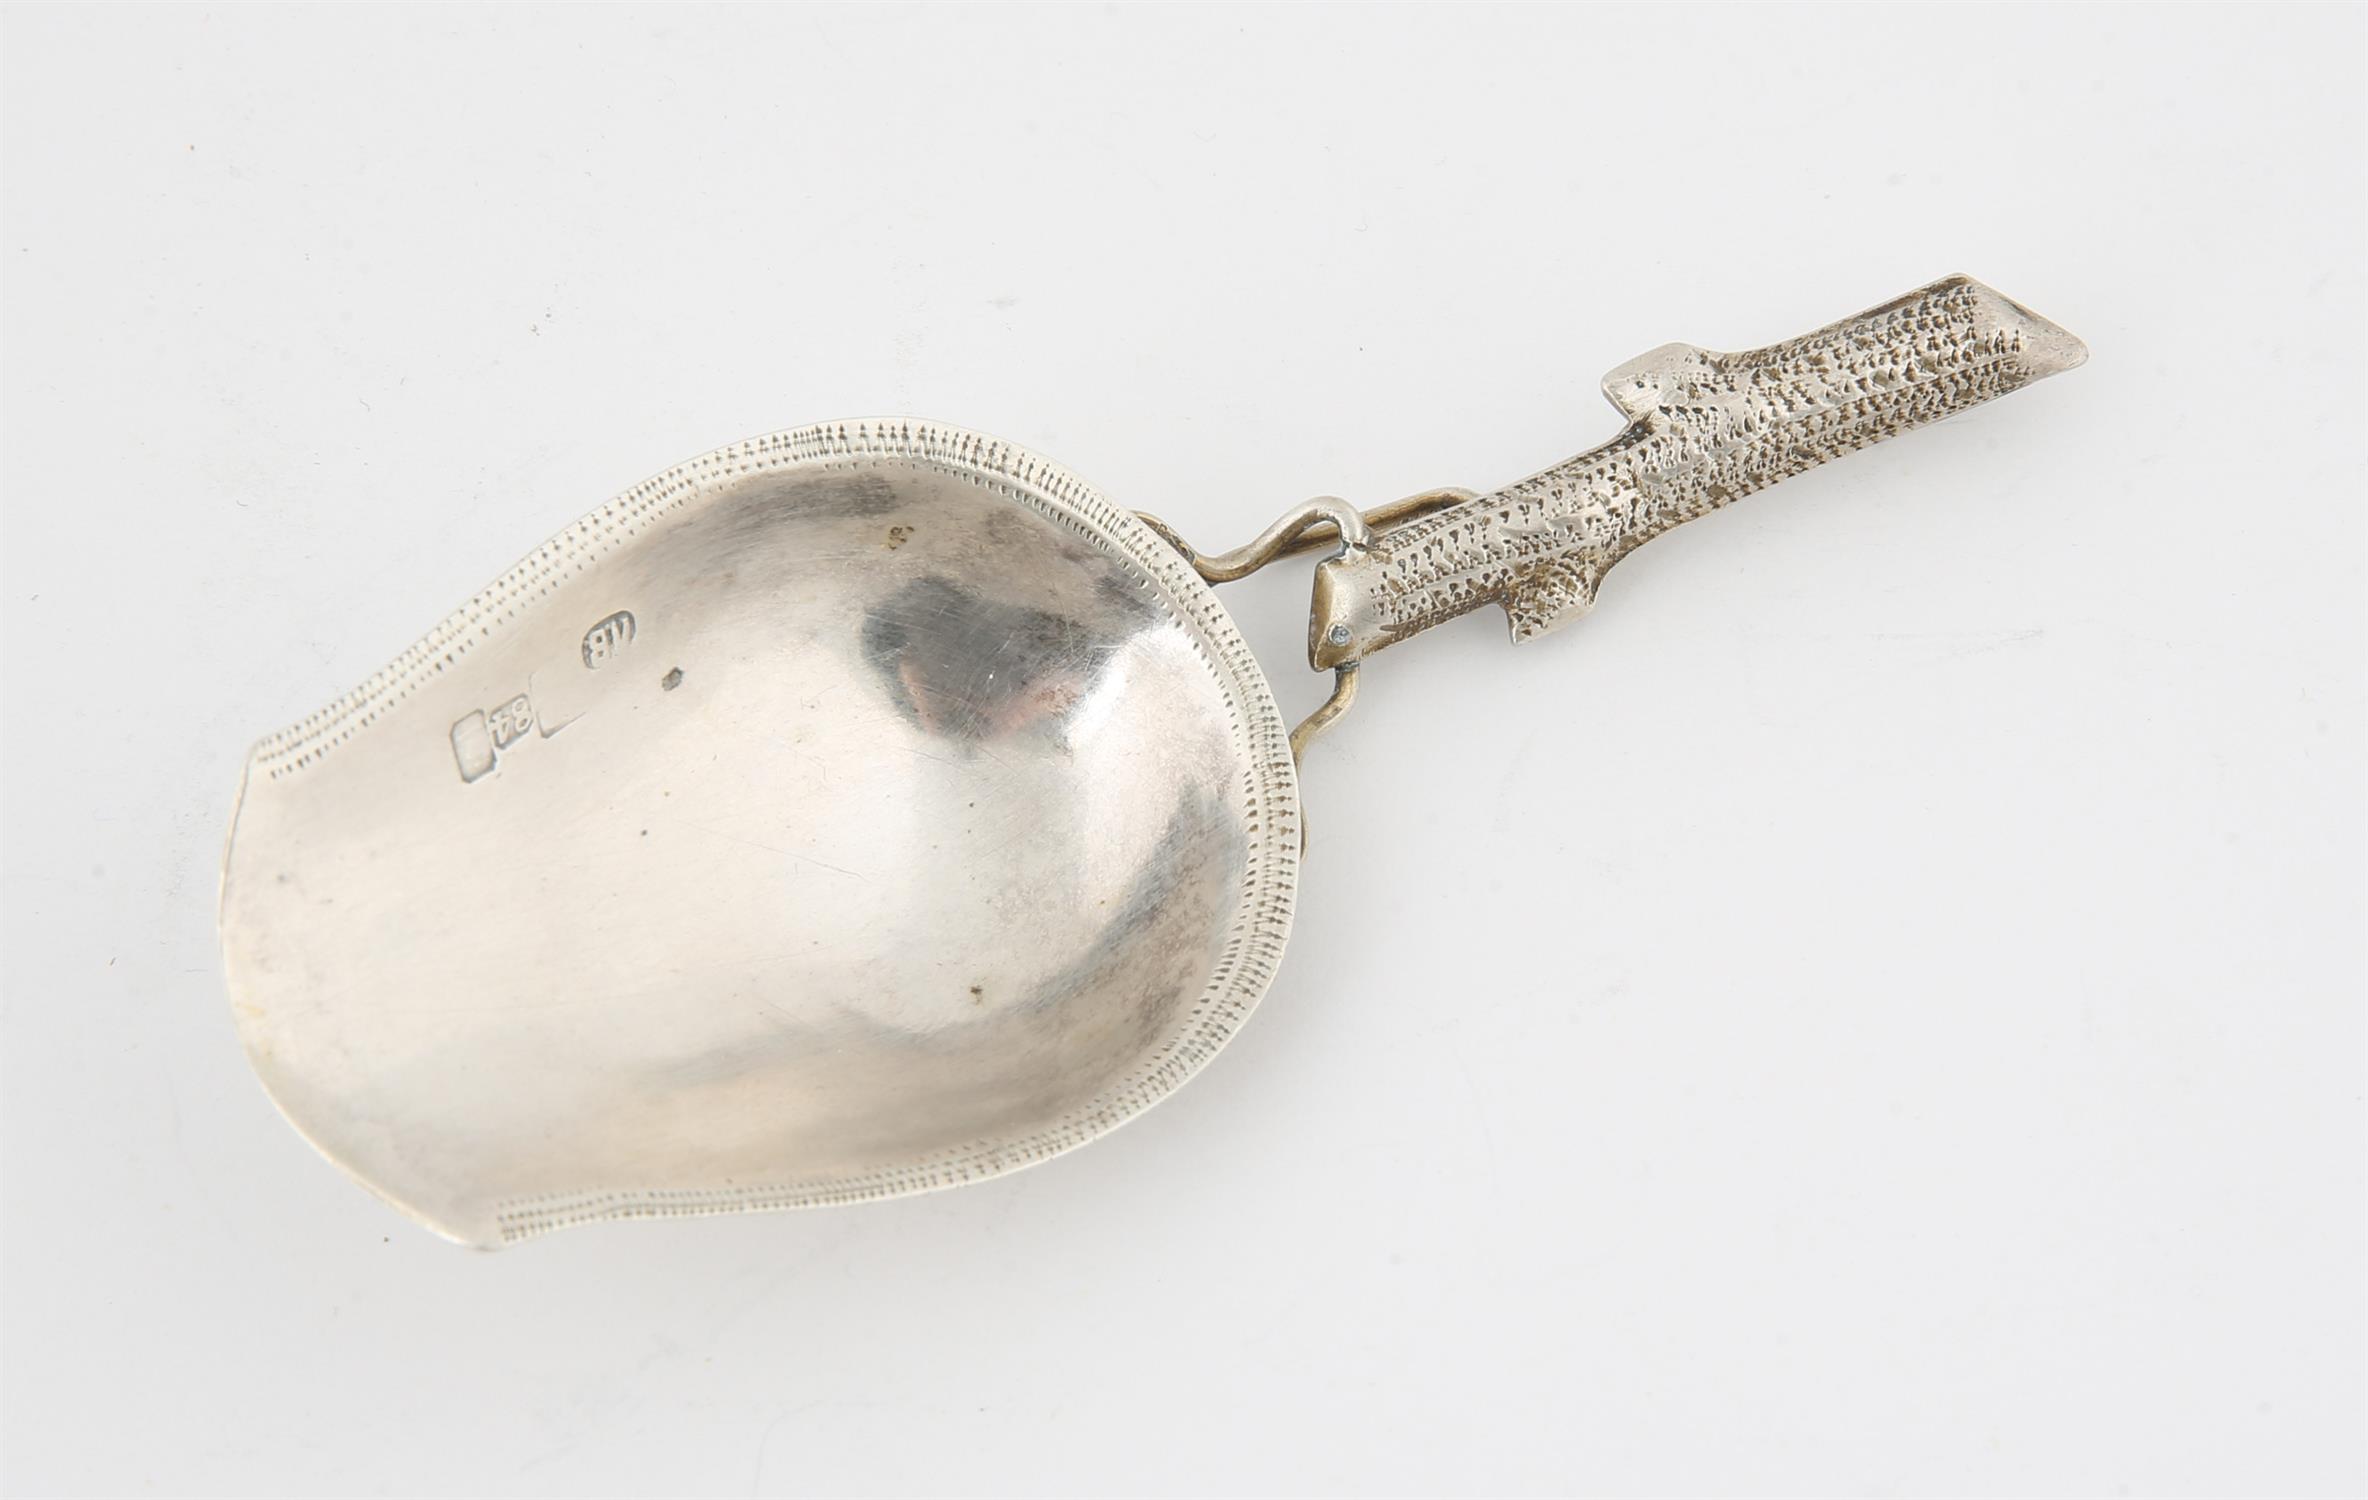 19th century naturalistic design Russian silver 84 grade tea caddy spoon, the handle in the form of